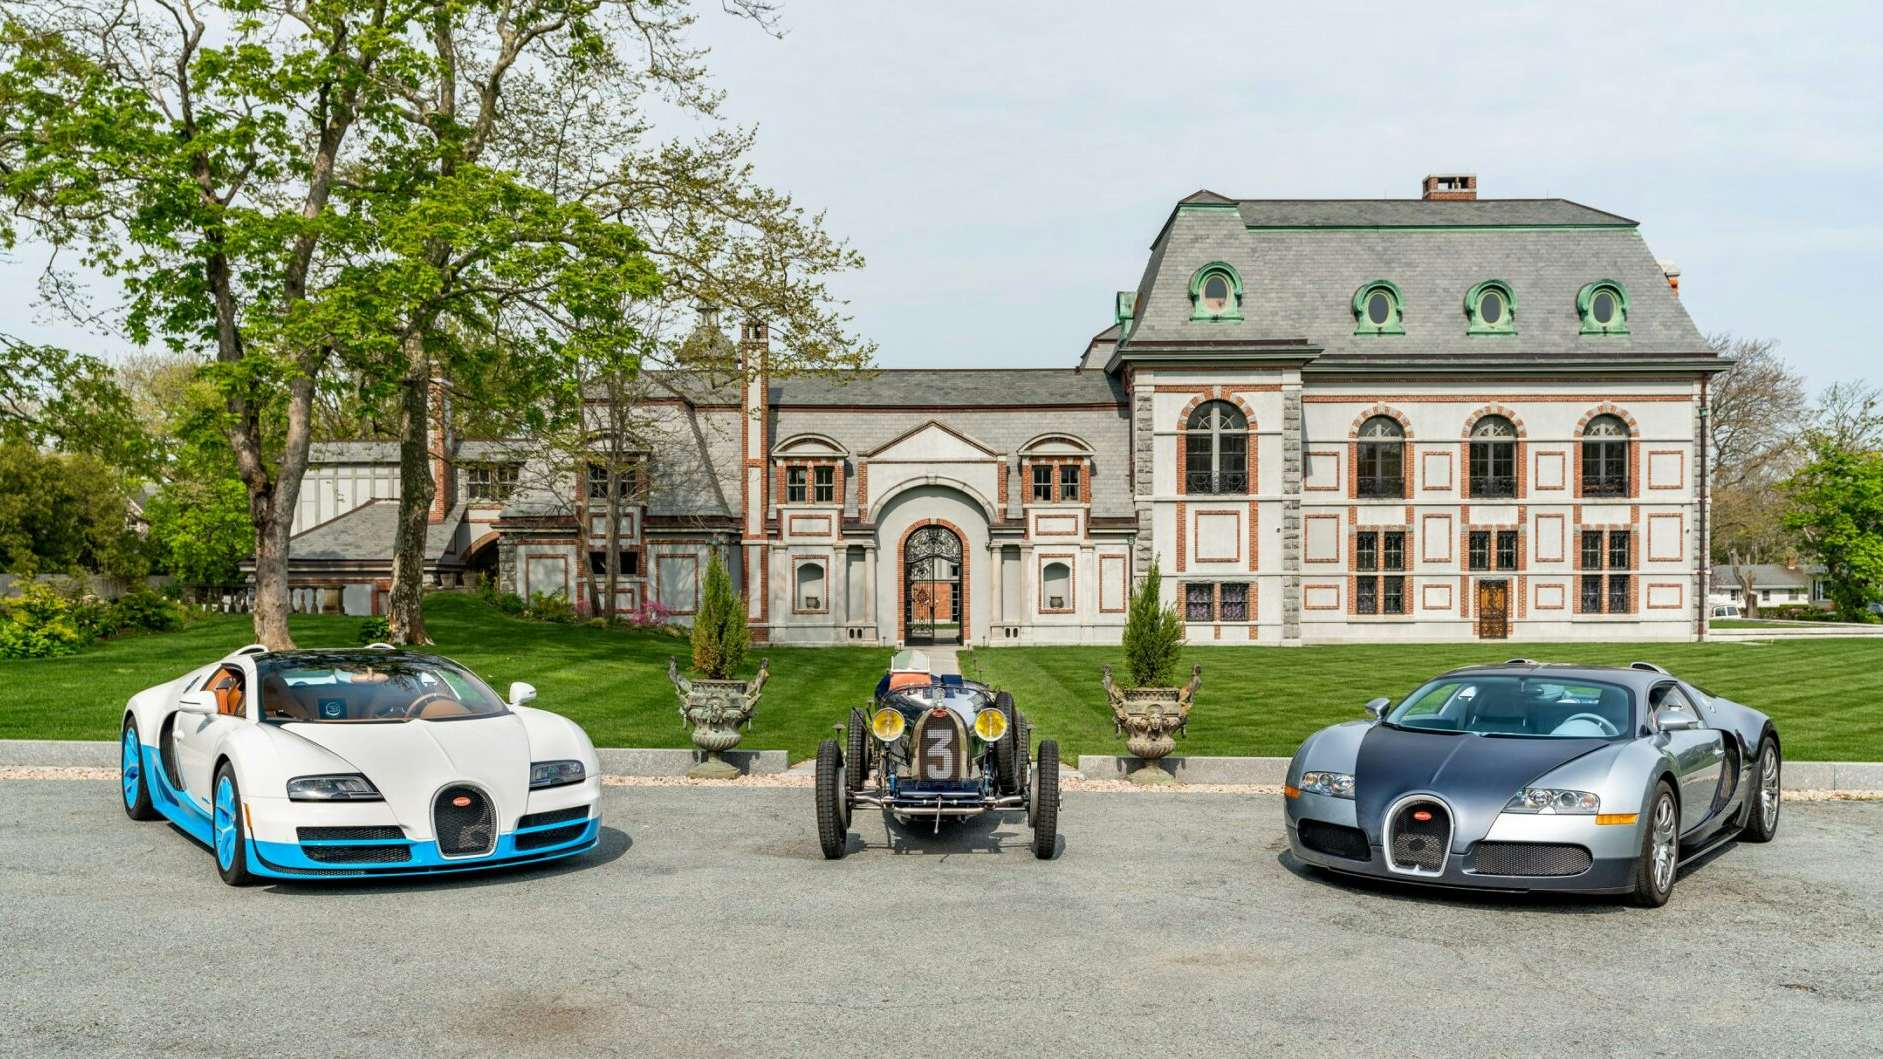 A stunning display of two modern Bugattis and a classic model in front of an elegant mansion in Newport during the Audrain Newport Concours & Motor Week